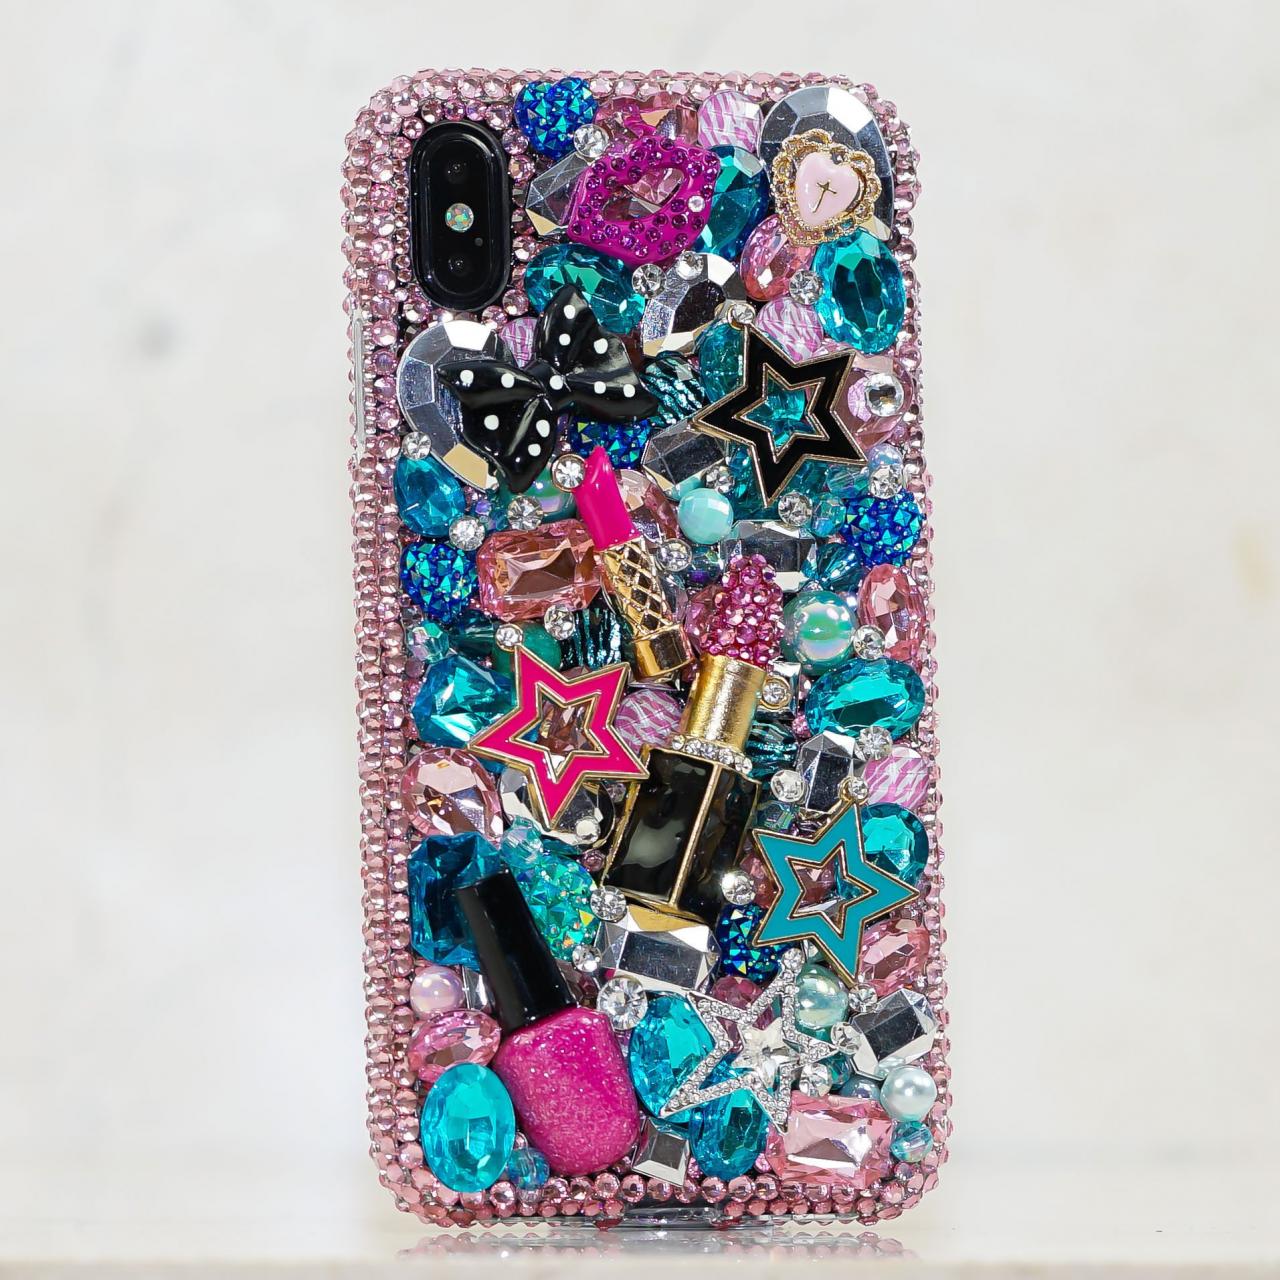 Genuine Pink Crystals Case For iPhone X XS Max XR 7 8 Plus Samsung Galaxy S9 Note 9 Bling Diamond Sparkle Super Star Lipstick Makeup Design